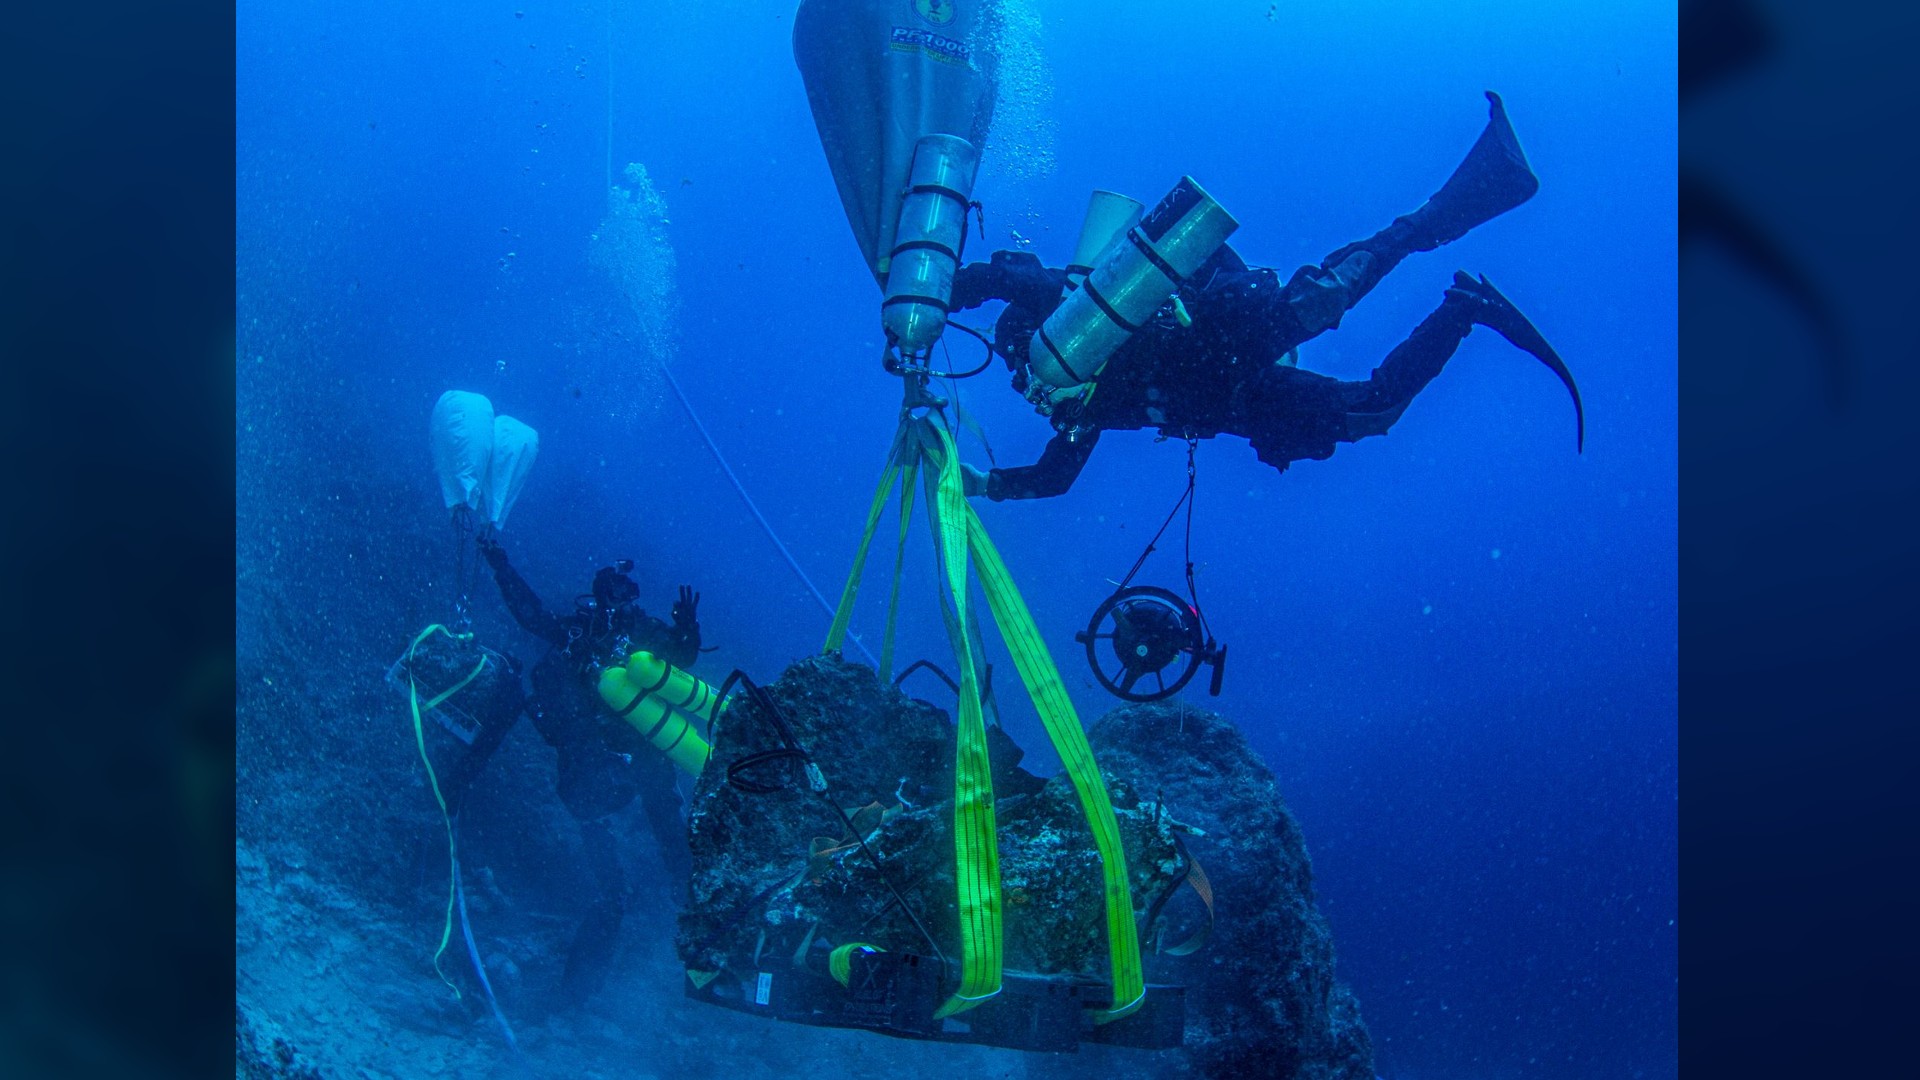 Here we see 2 scuba divers underwater using some kind of balloon and long yellow ropes to wrap around a badly corroded marble plinth that was found at a shipwreck underwater.